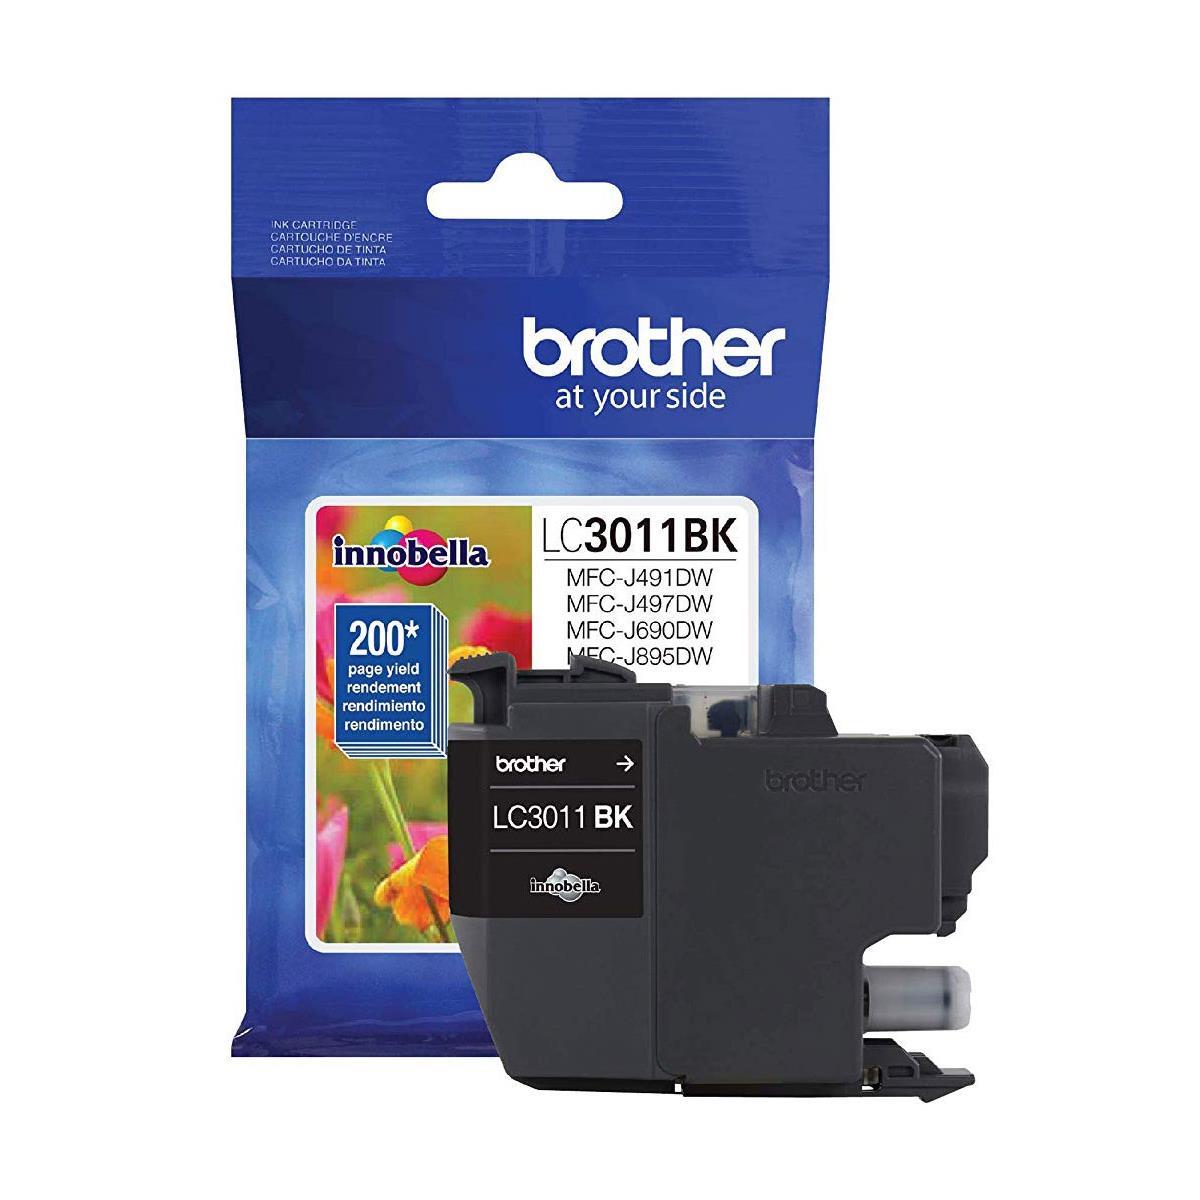 

Brother LC3011 Innobella Standard-Yield Ink Cartridge, 200 Pages Yield, Black